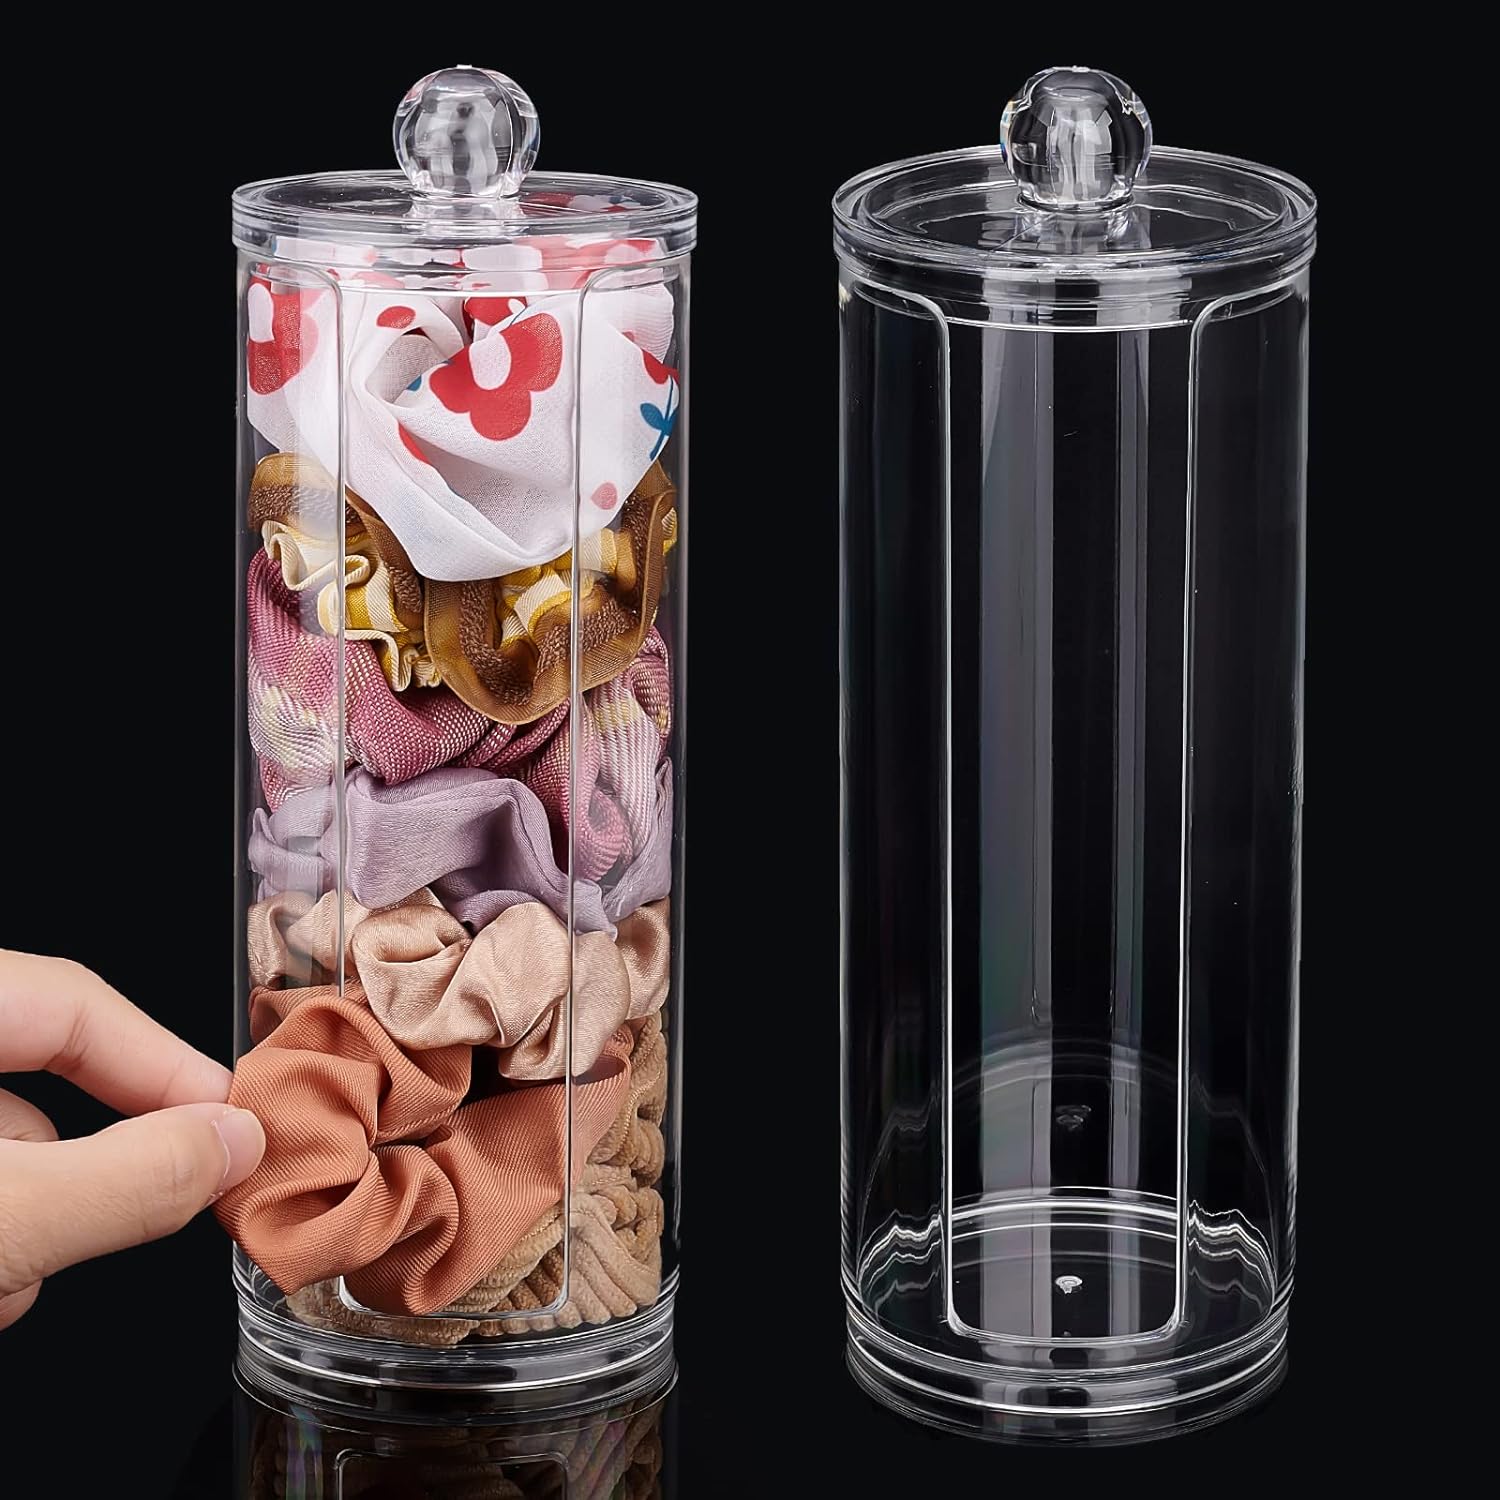 Clear Acrylic Holder and Organizer